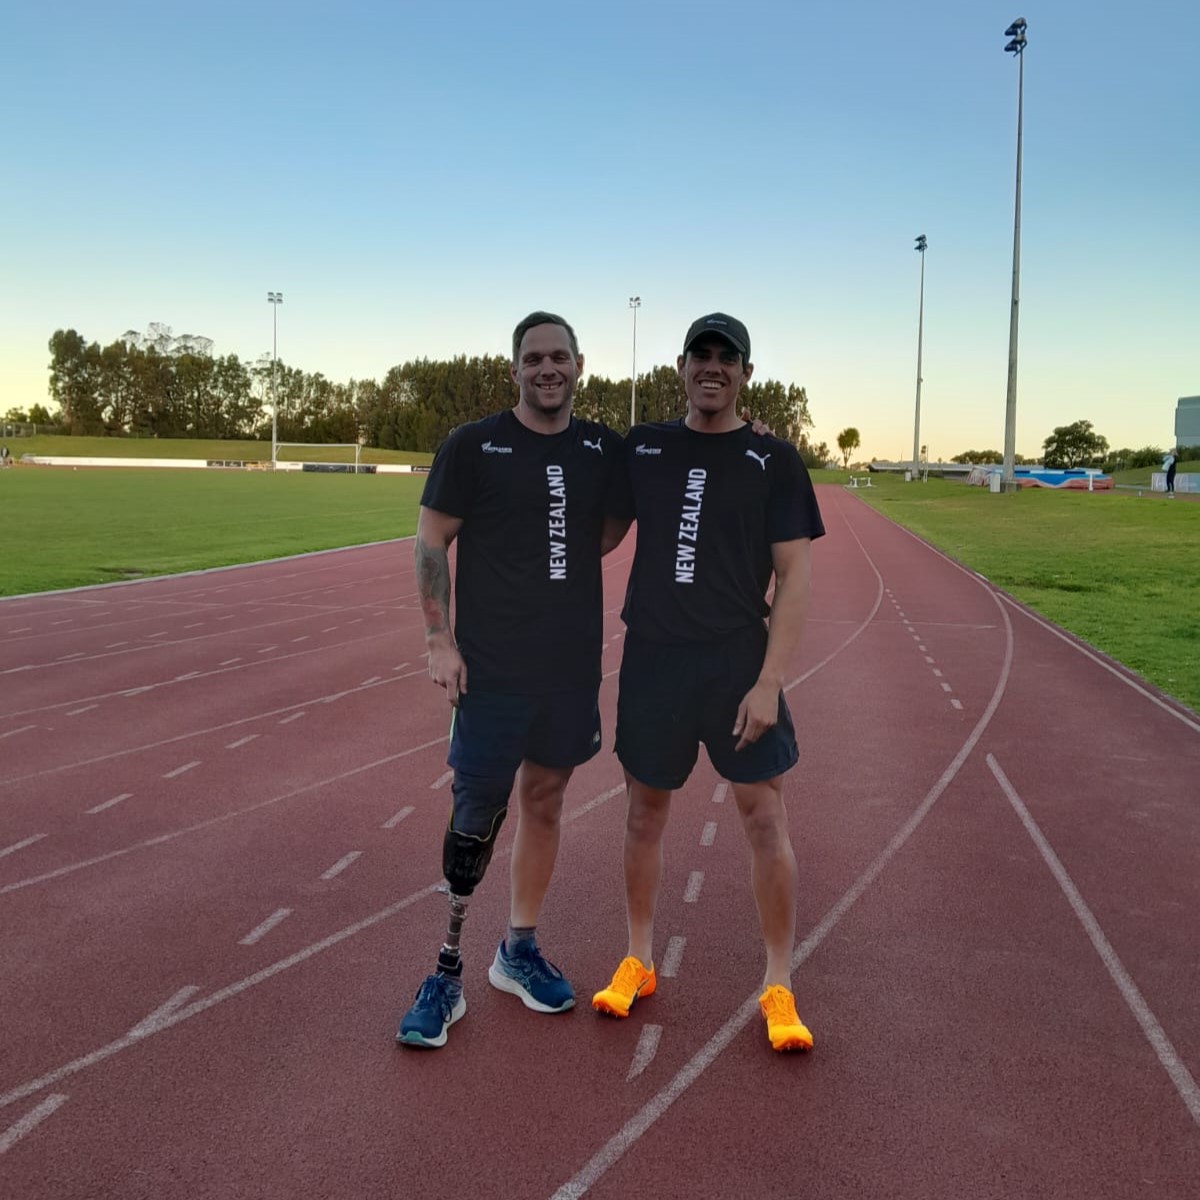 Mitch and Joe smile with their arms around each other's shoulders, standing on the track on a sunny evening.